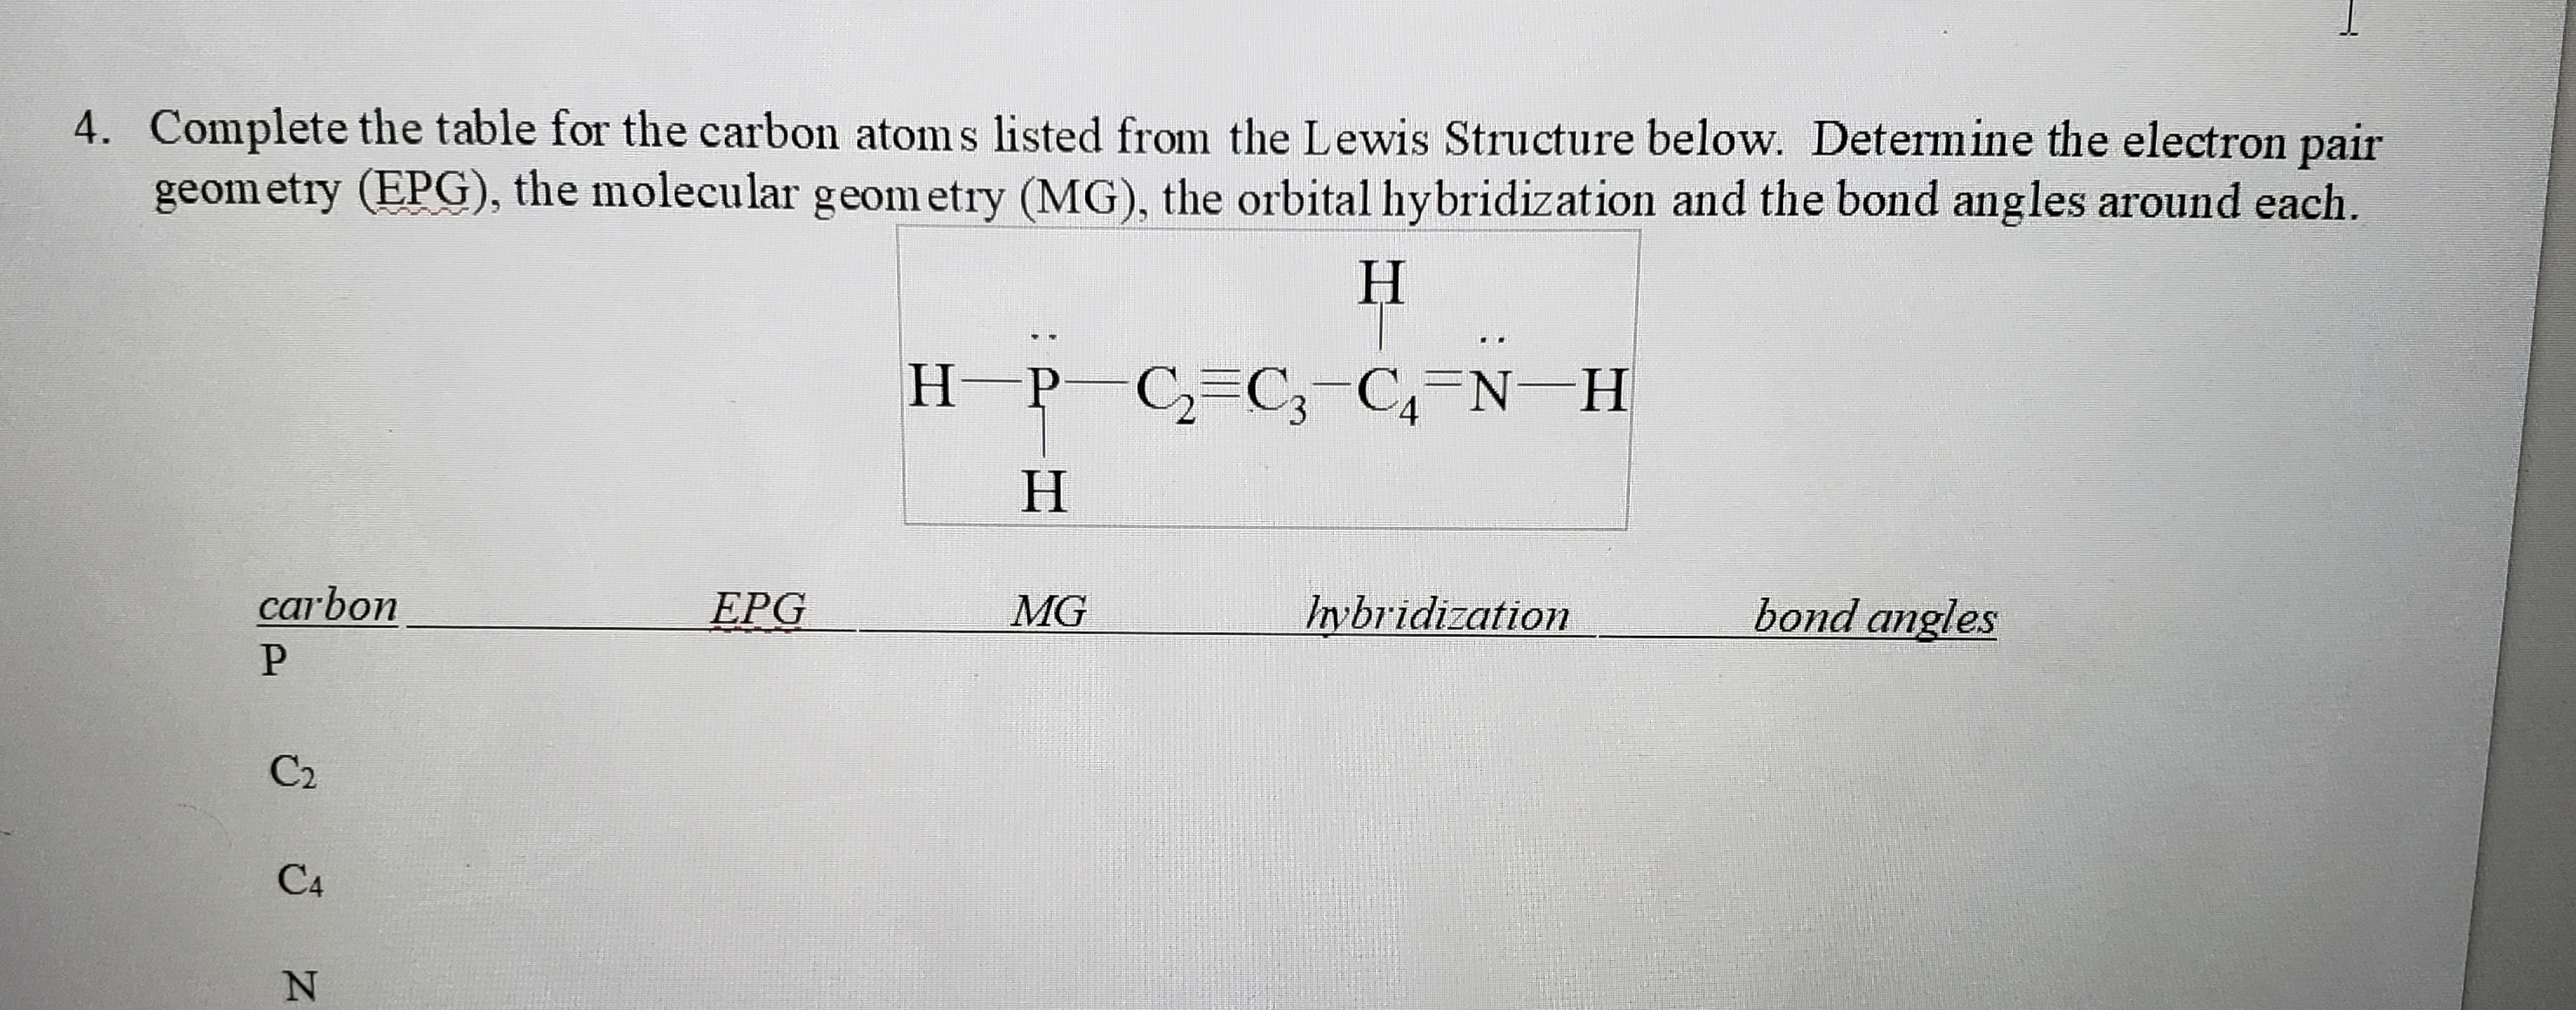 4. Complete the table for the carbon atoms listed from the Lewis Structure below. Determine the electron pair
geom etry (EPG), the molecular geom etry (MG), the orbital hybridization and the bond angles around each.
Н
H P C=C;-C,=N-H
carbon
EPG
MG
Iybridization
bond angles
C2
C4
